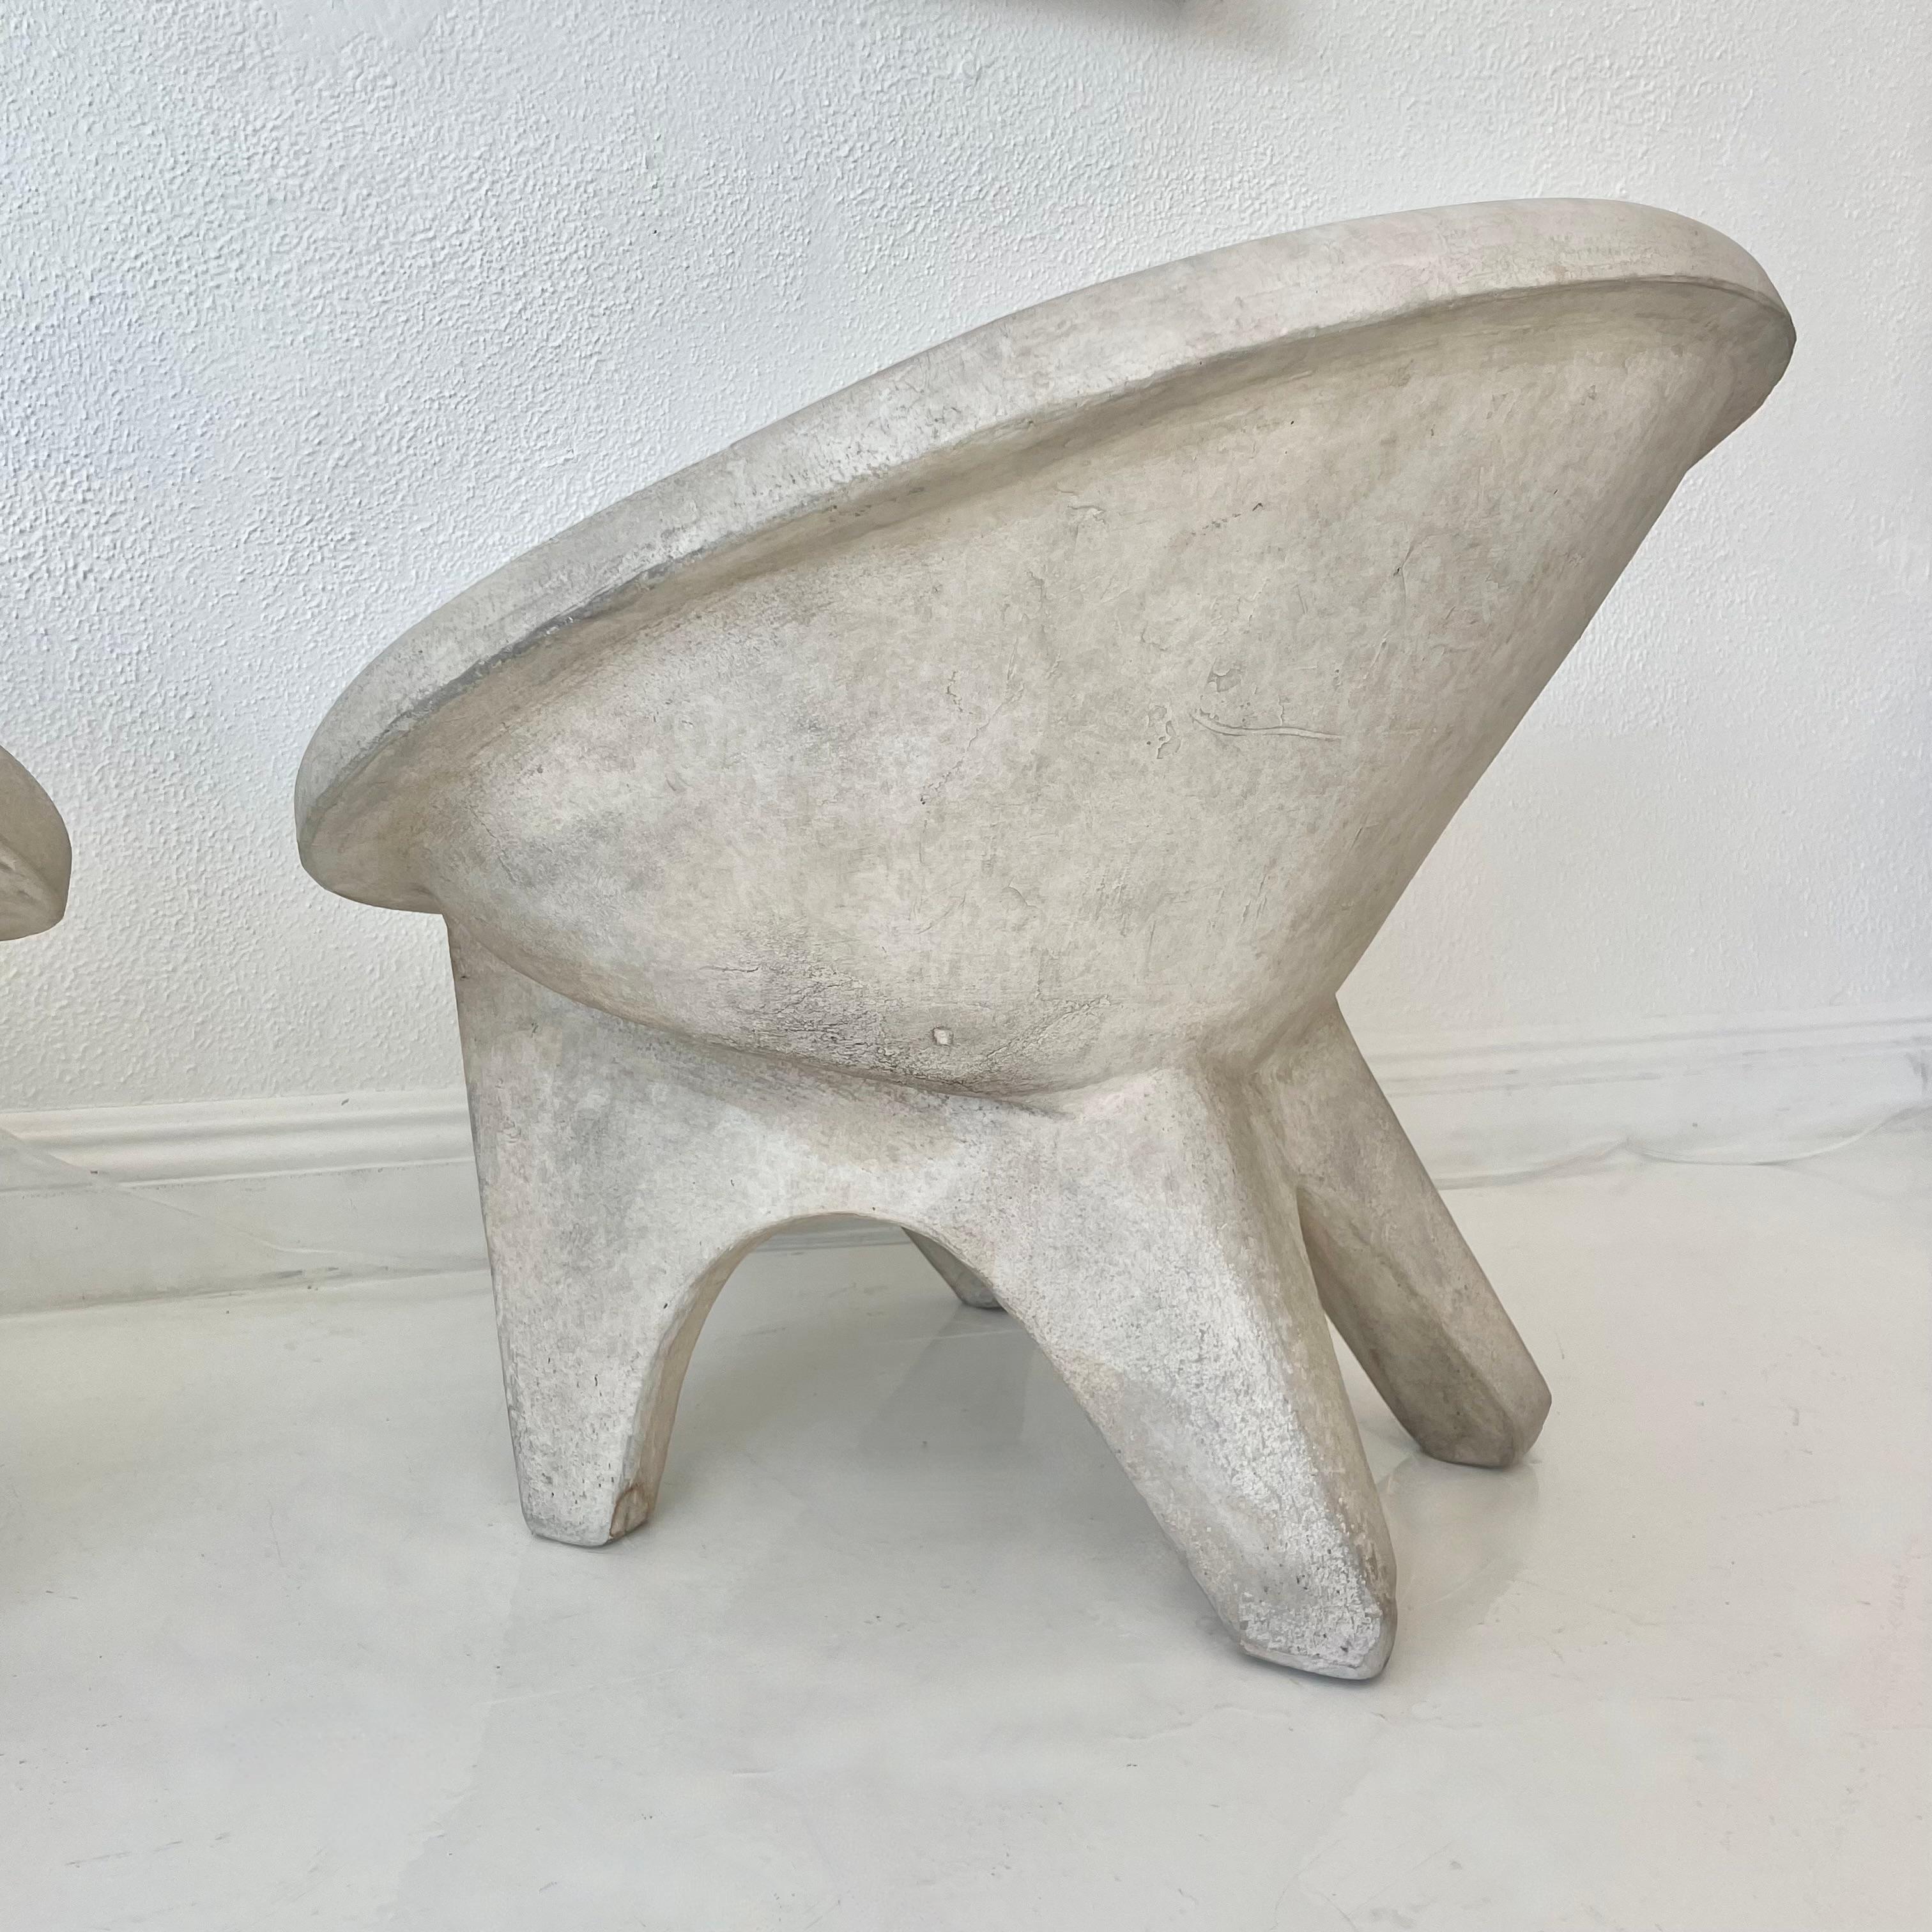 Pair of Sculptural Concrete Chairs by Merit Los Angeles For Sale 3